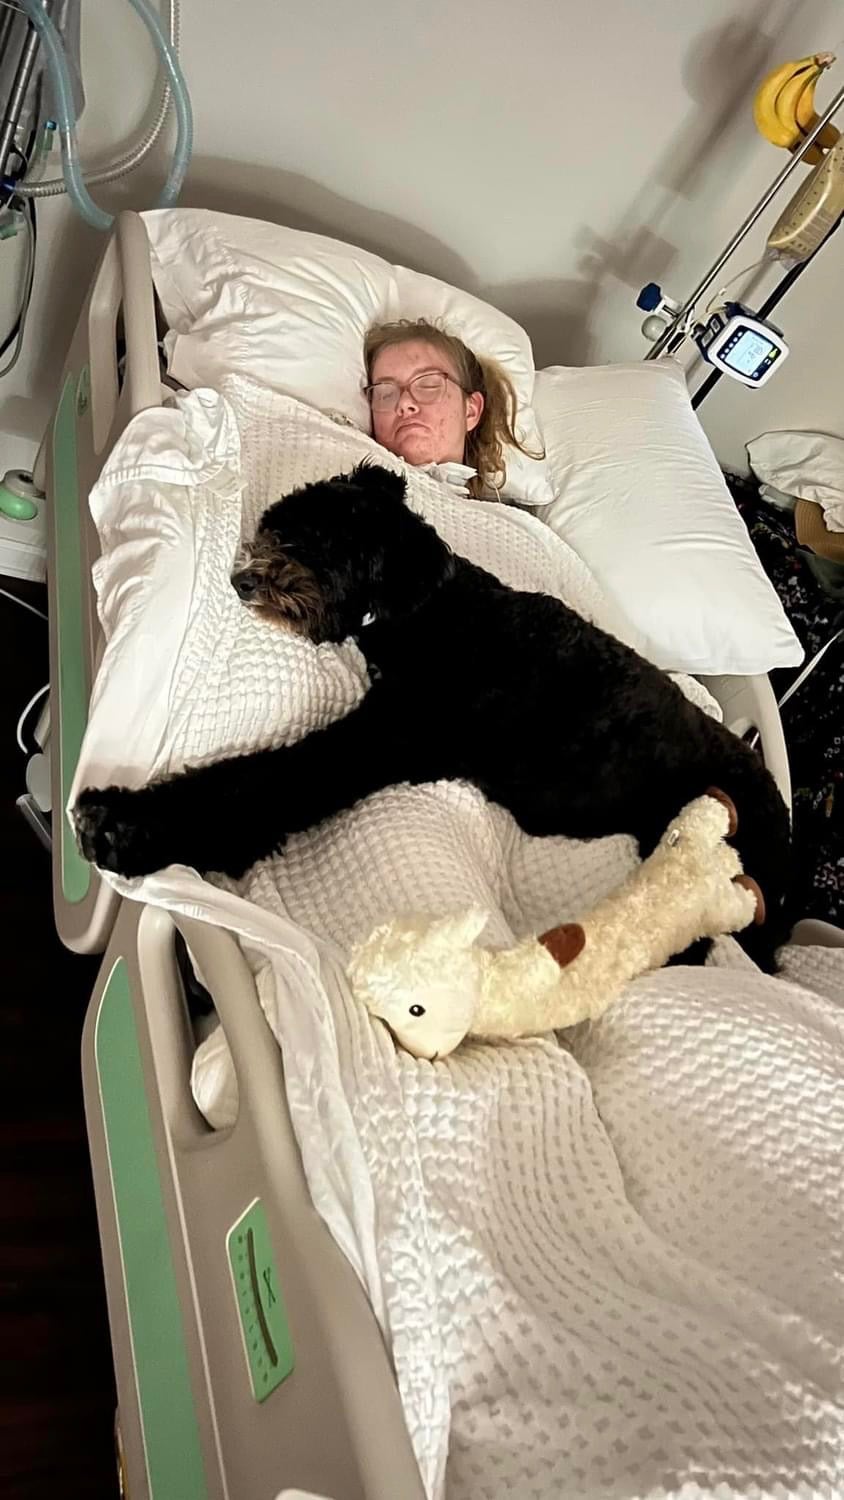 Caitlin is pictured this week sleeping at home with her service dog, Belle; since her injury, her mother sleeps in the same room